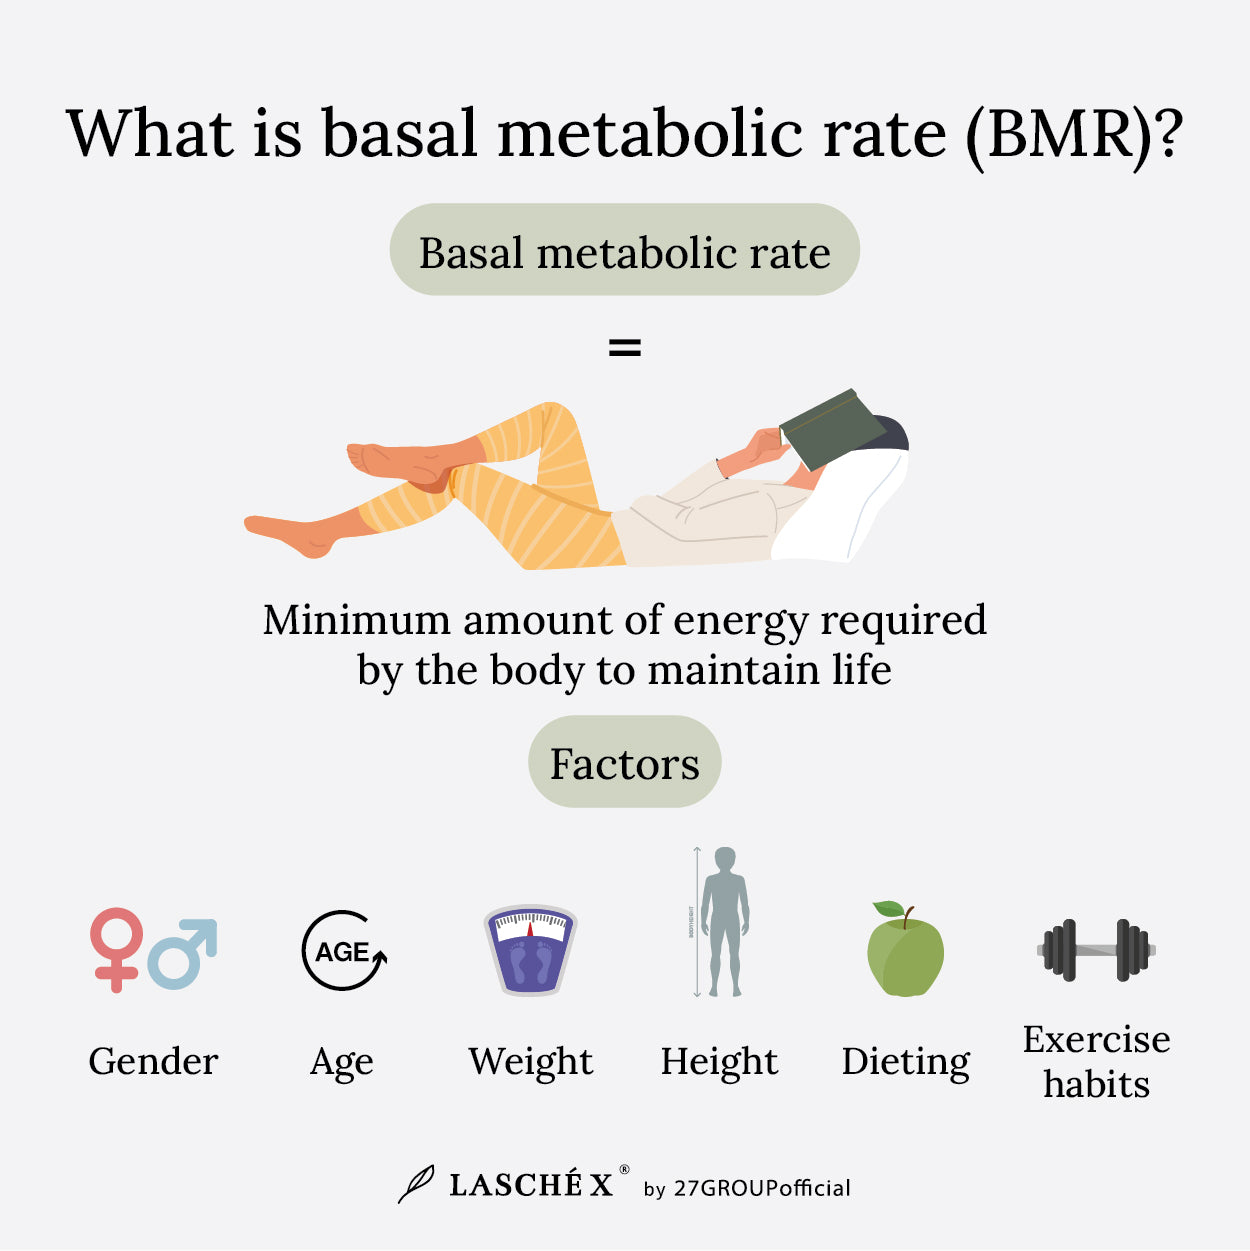 Basal metabolic rate is the minimum amount of energy required by the body to maintain life